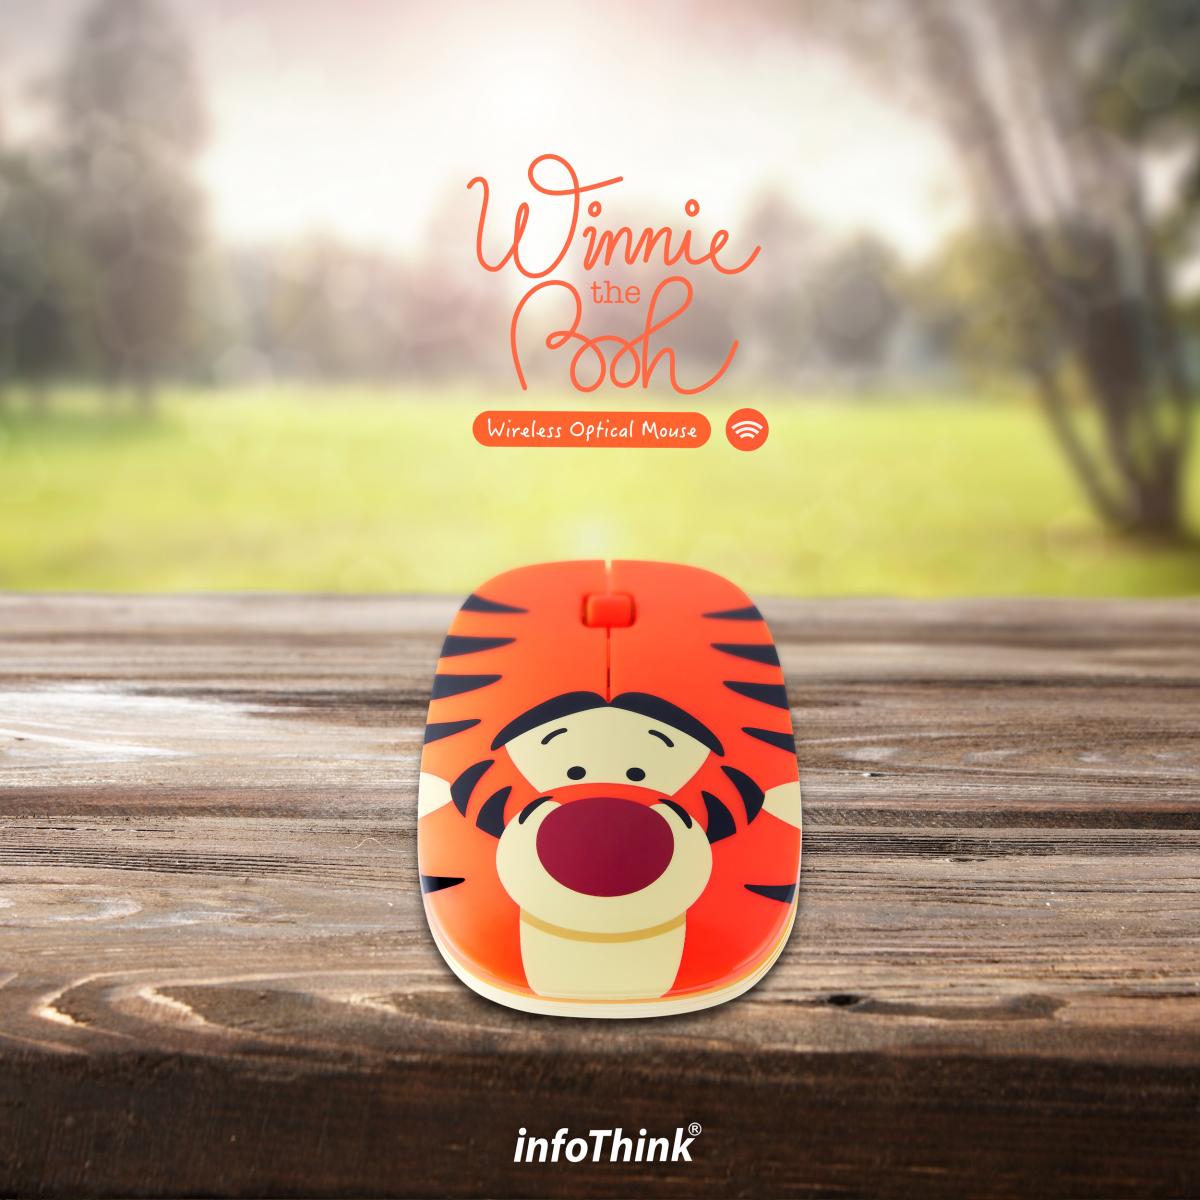 Infothink Disney Winnie The Pooh Tigger ver Wireless Optical Mouse